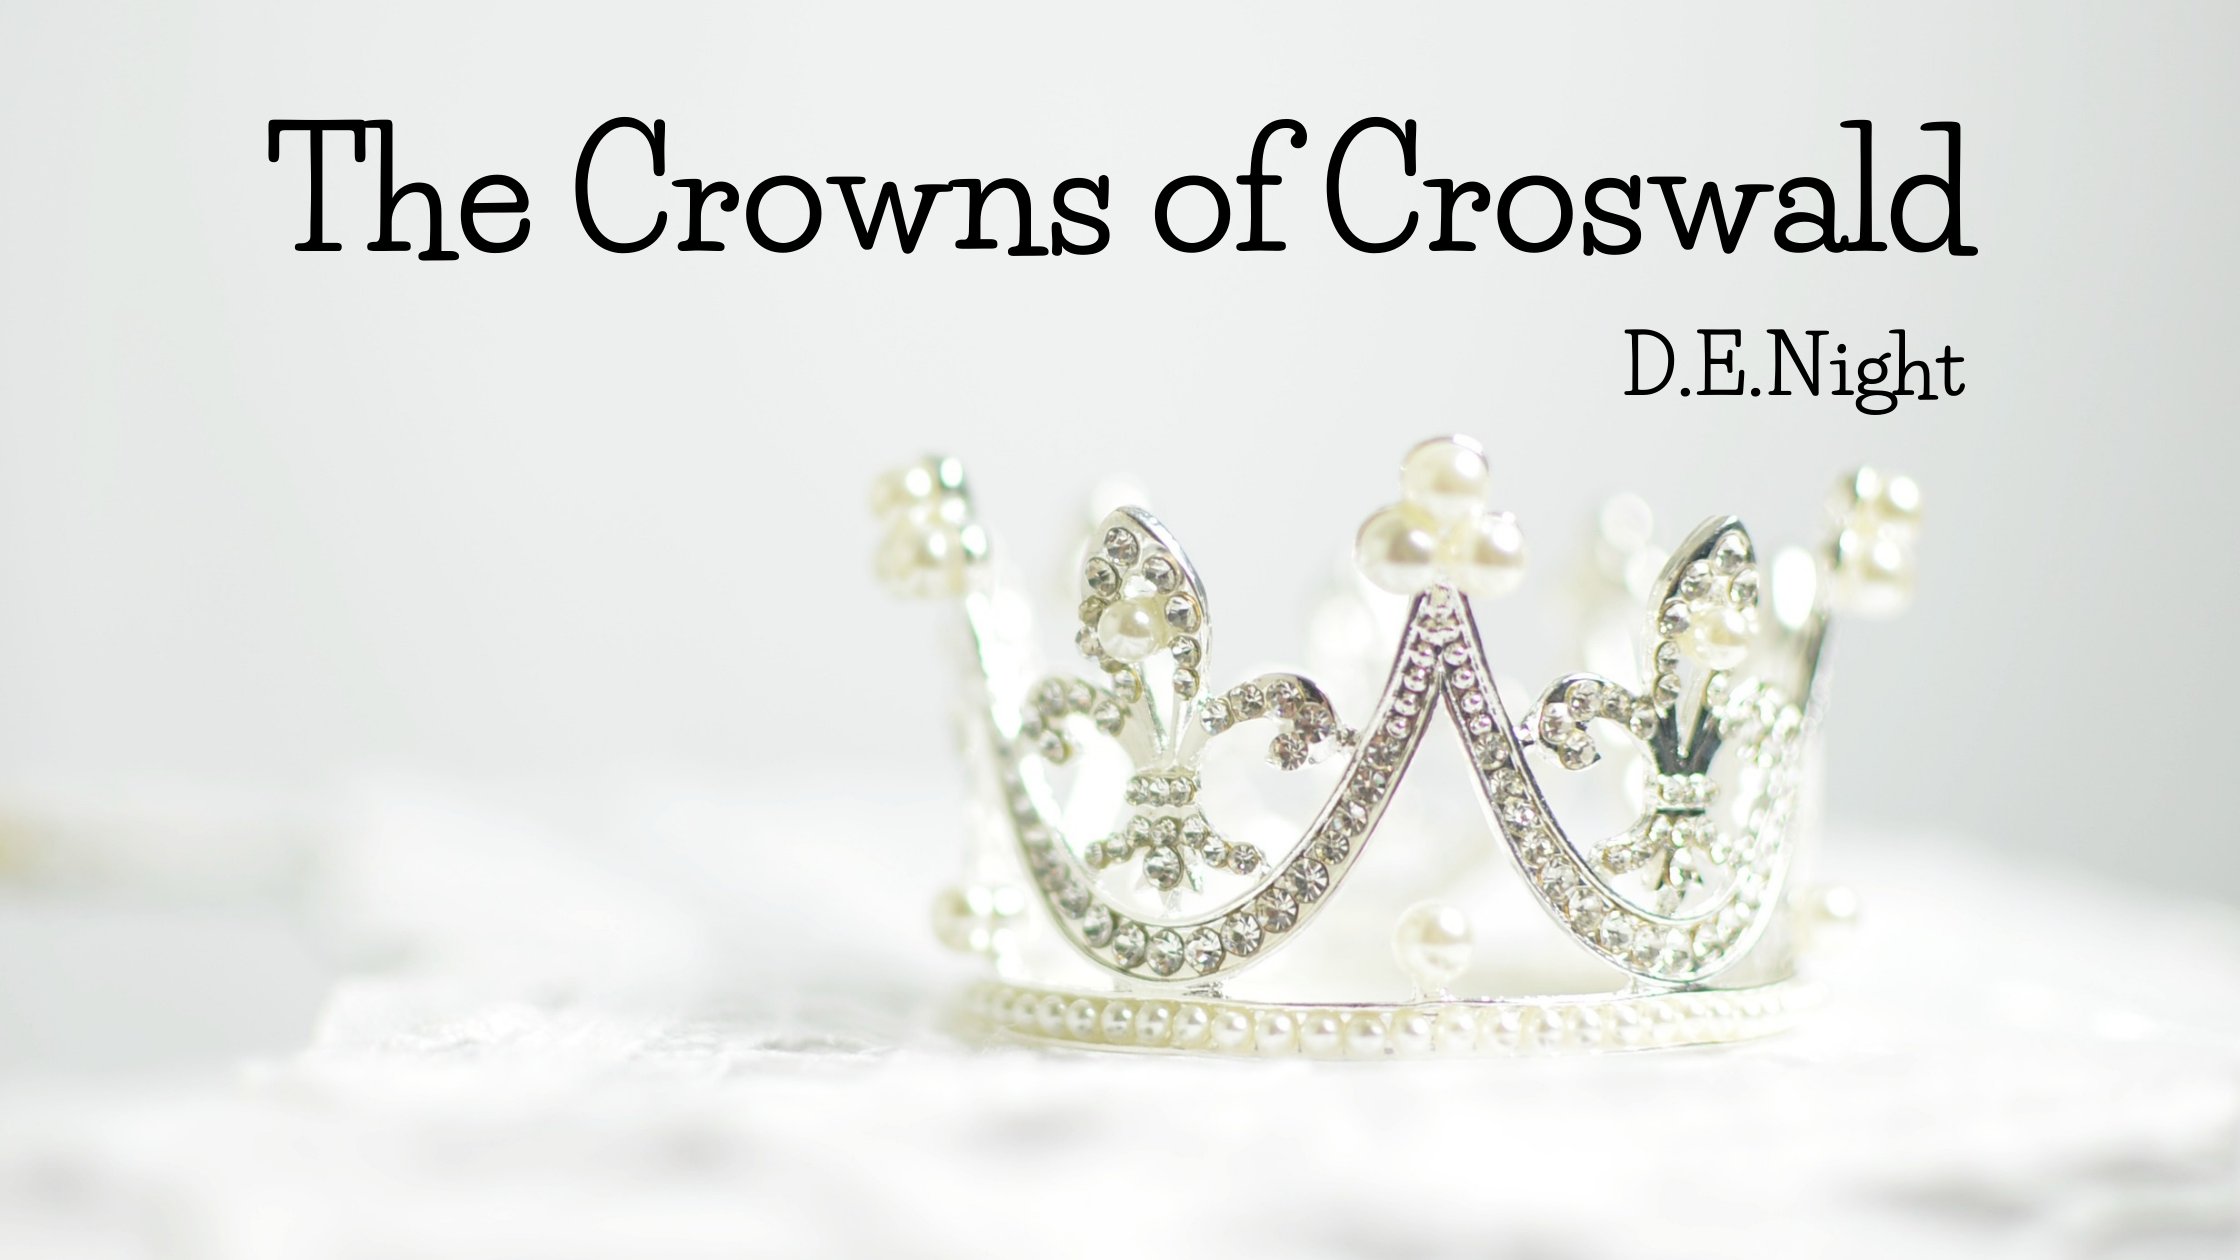 Book Review: The Crowns of Croswald by D.E.Night